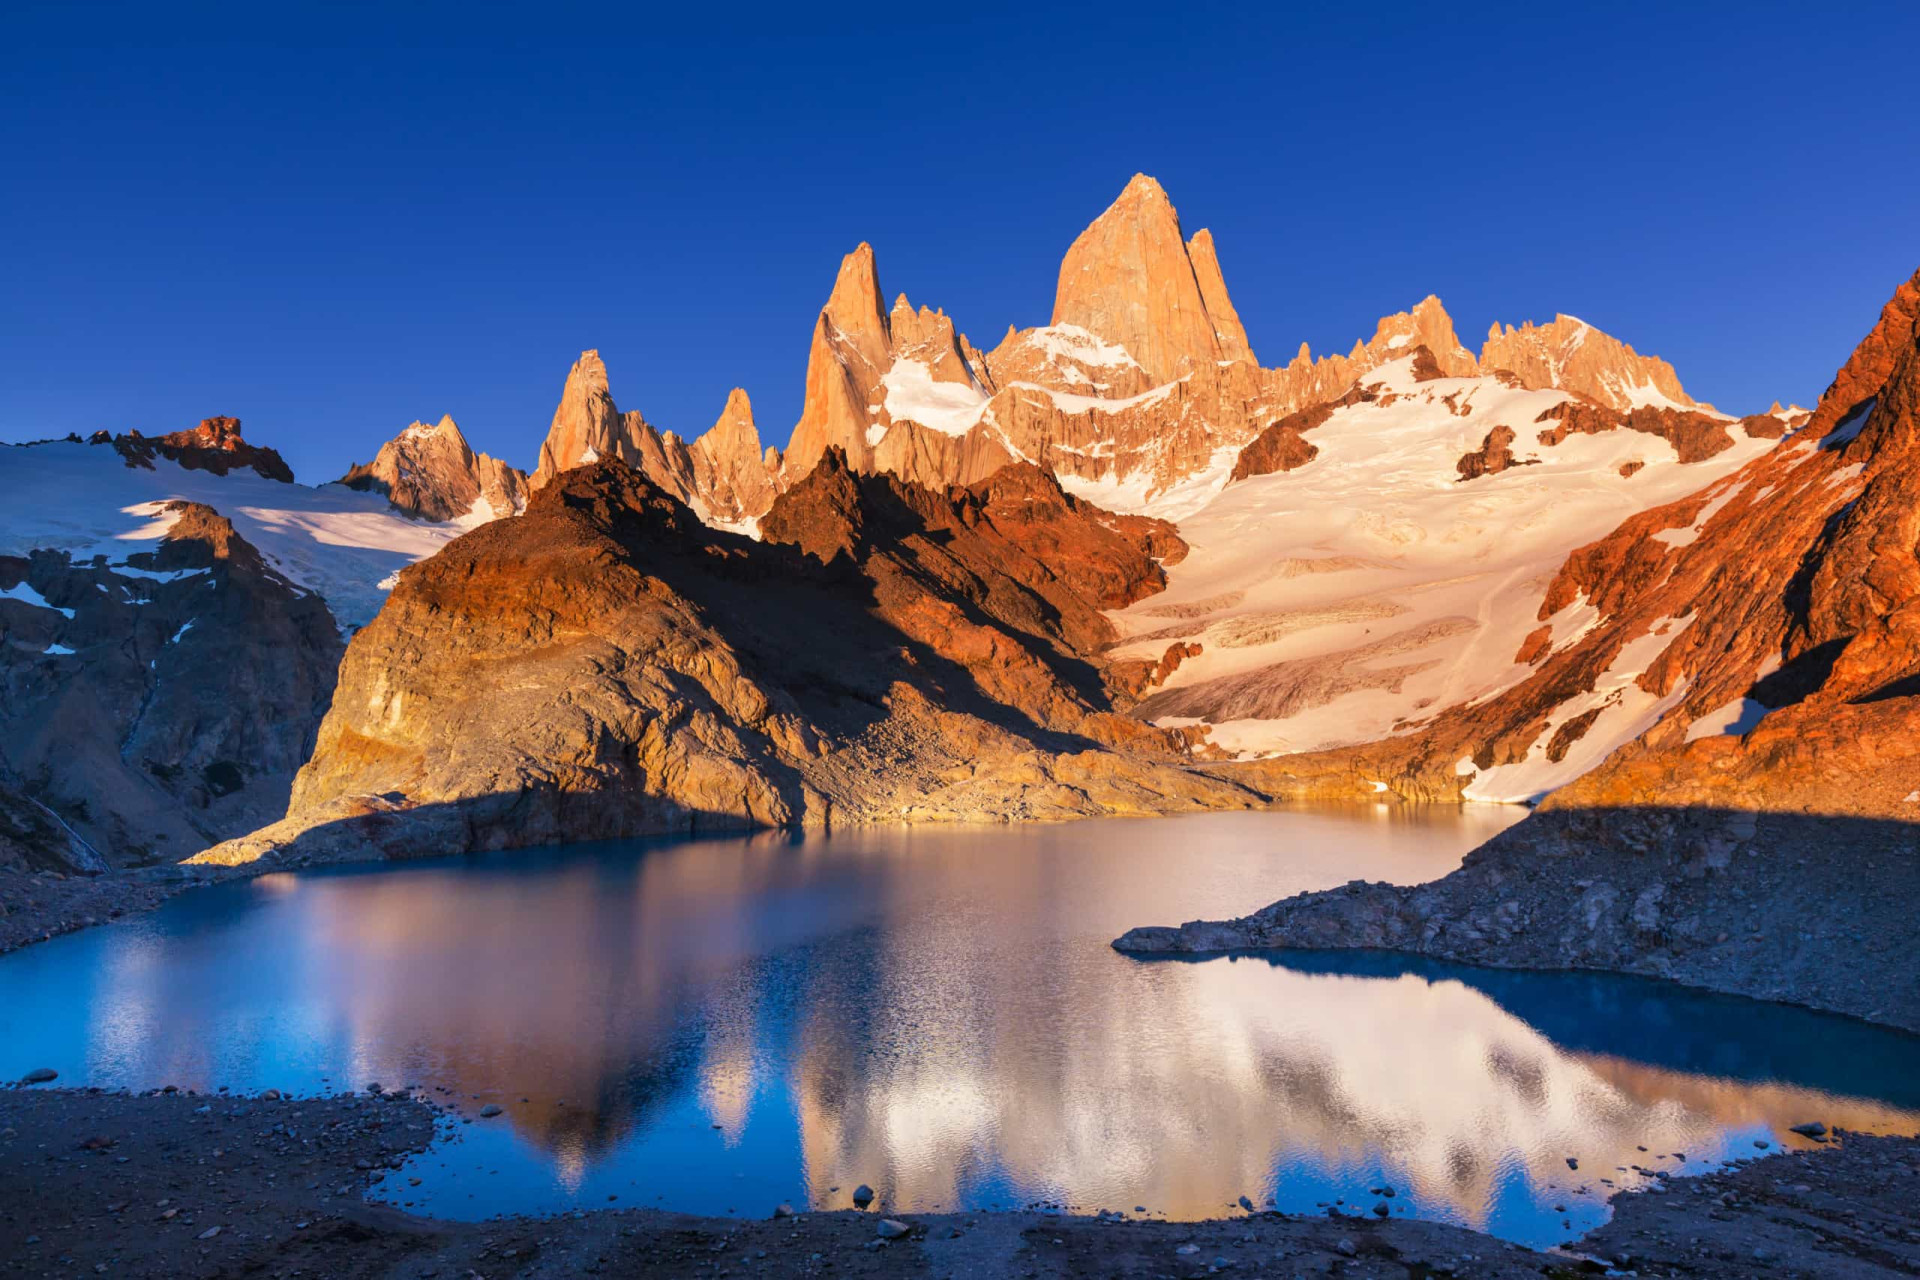 Cerro Fitz Roy is in the Los Glaciares National Park, where you will find towering mountains and incredible views. It's the perfect place for a long hike.<p><a href="https://www.msn.com/en-us/community/channel/vid-7xx8mnucu55yw63we9va2gwr7uihbxwc68fxqp25x6tg4ftibpra?cvid=94631541bc0f4f89bfd59158d696ad7e">Follow us and access great exclusive content every day</a></p>